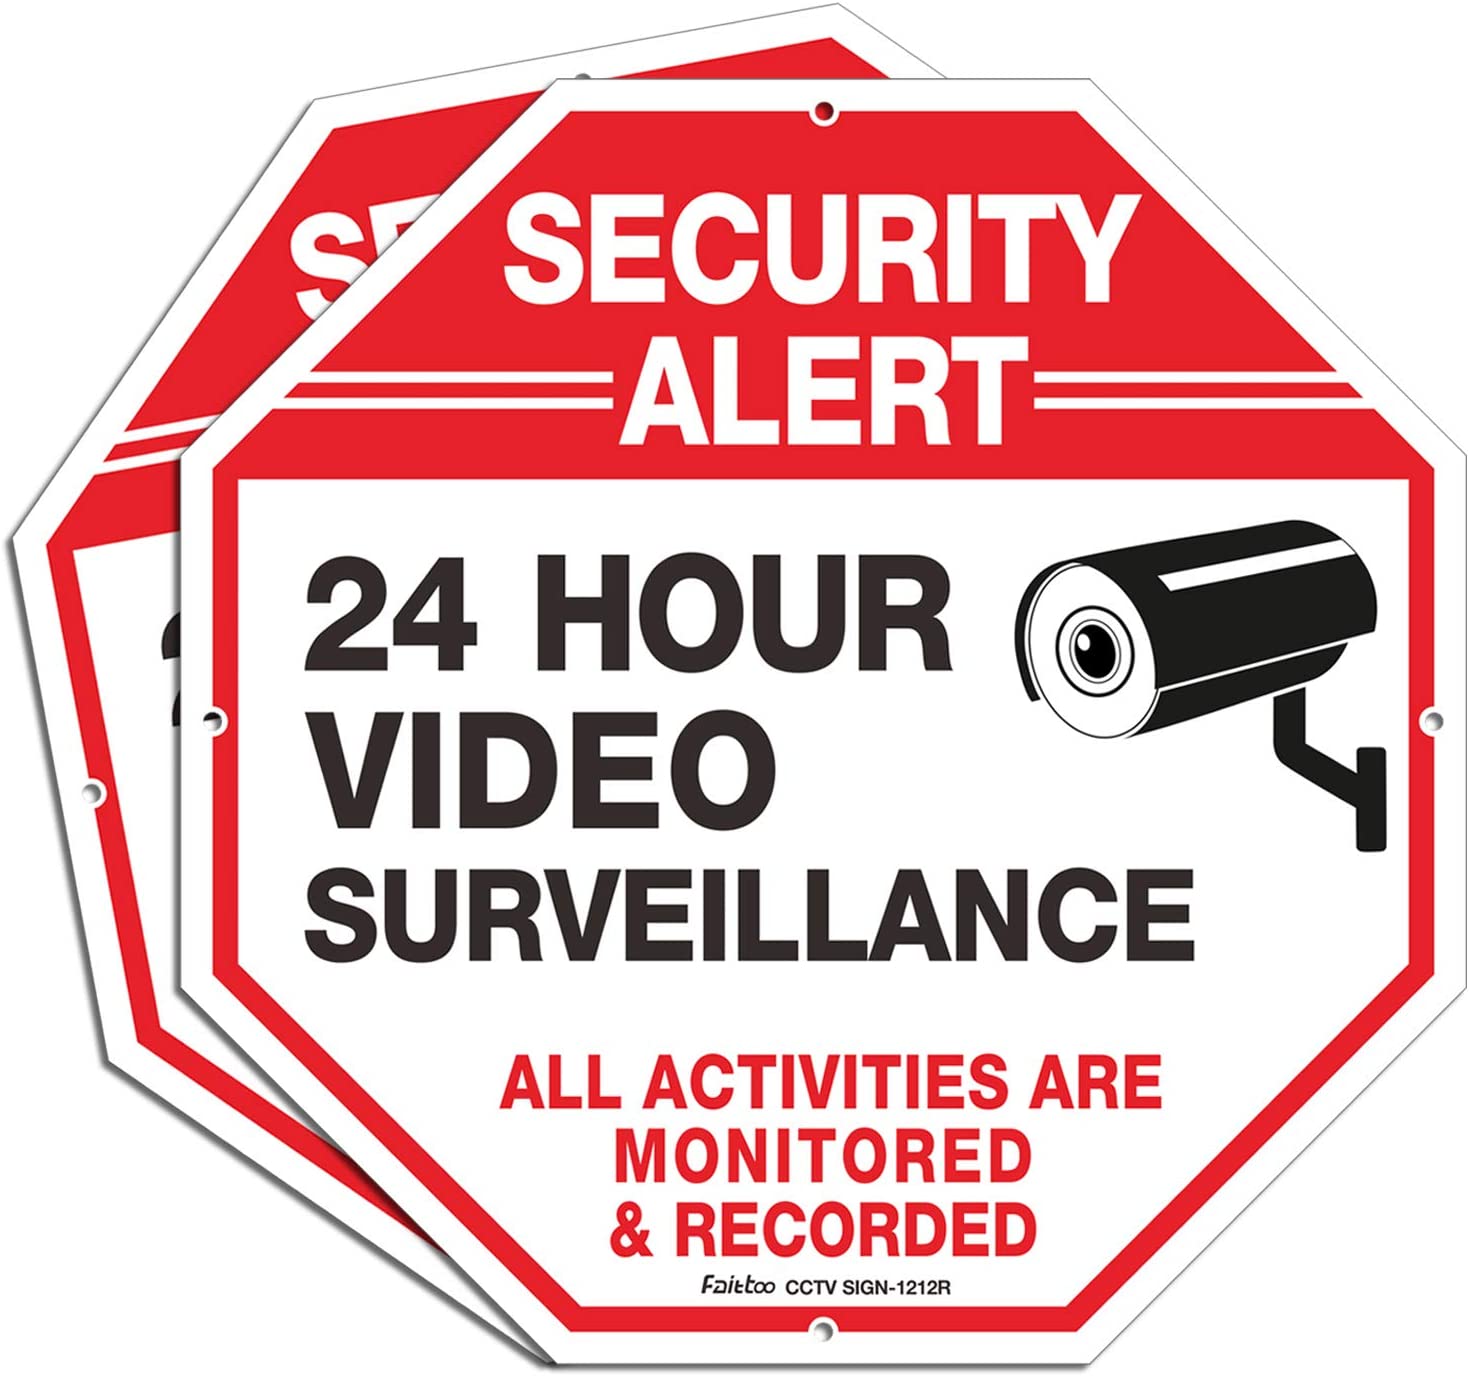 Video Surveillance Signs (2 Pack) 12 x 12 Rust Free .040 Aluminum Security Warning Reflective Metal Signs, Indoor or Outdoor Use for Home Business CCTV Security Camera, UV Protected &amp; Waterproof